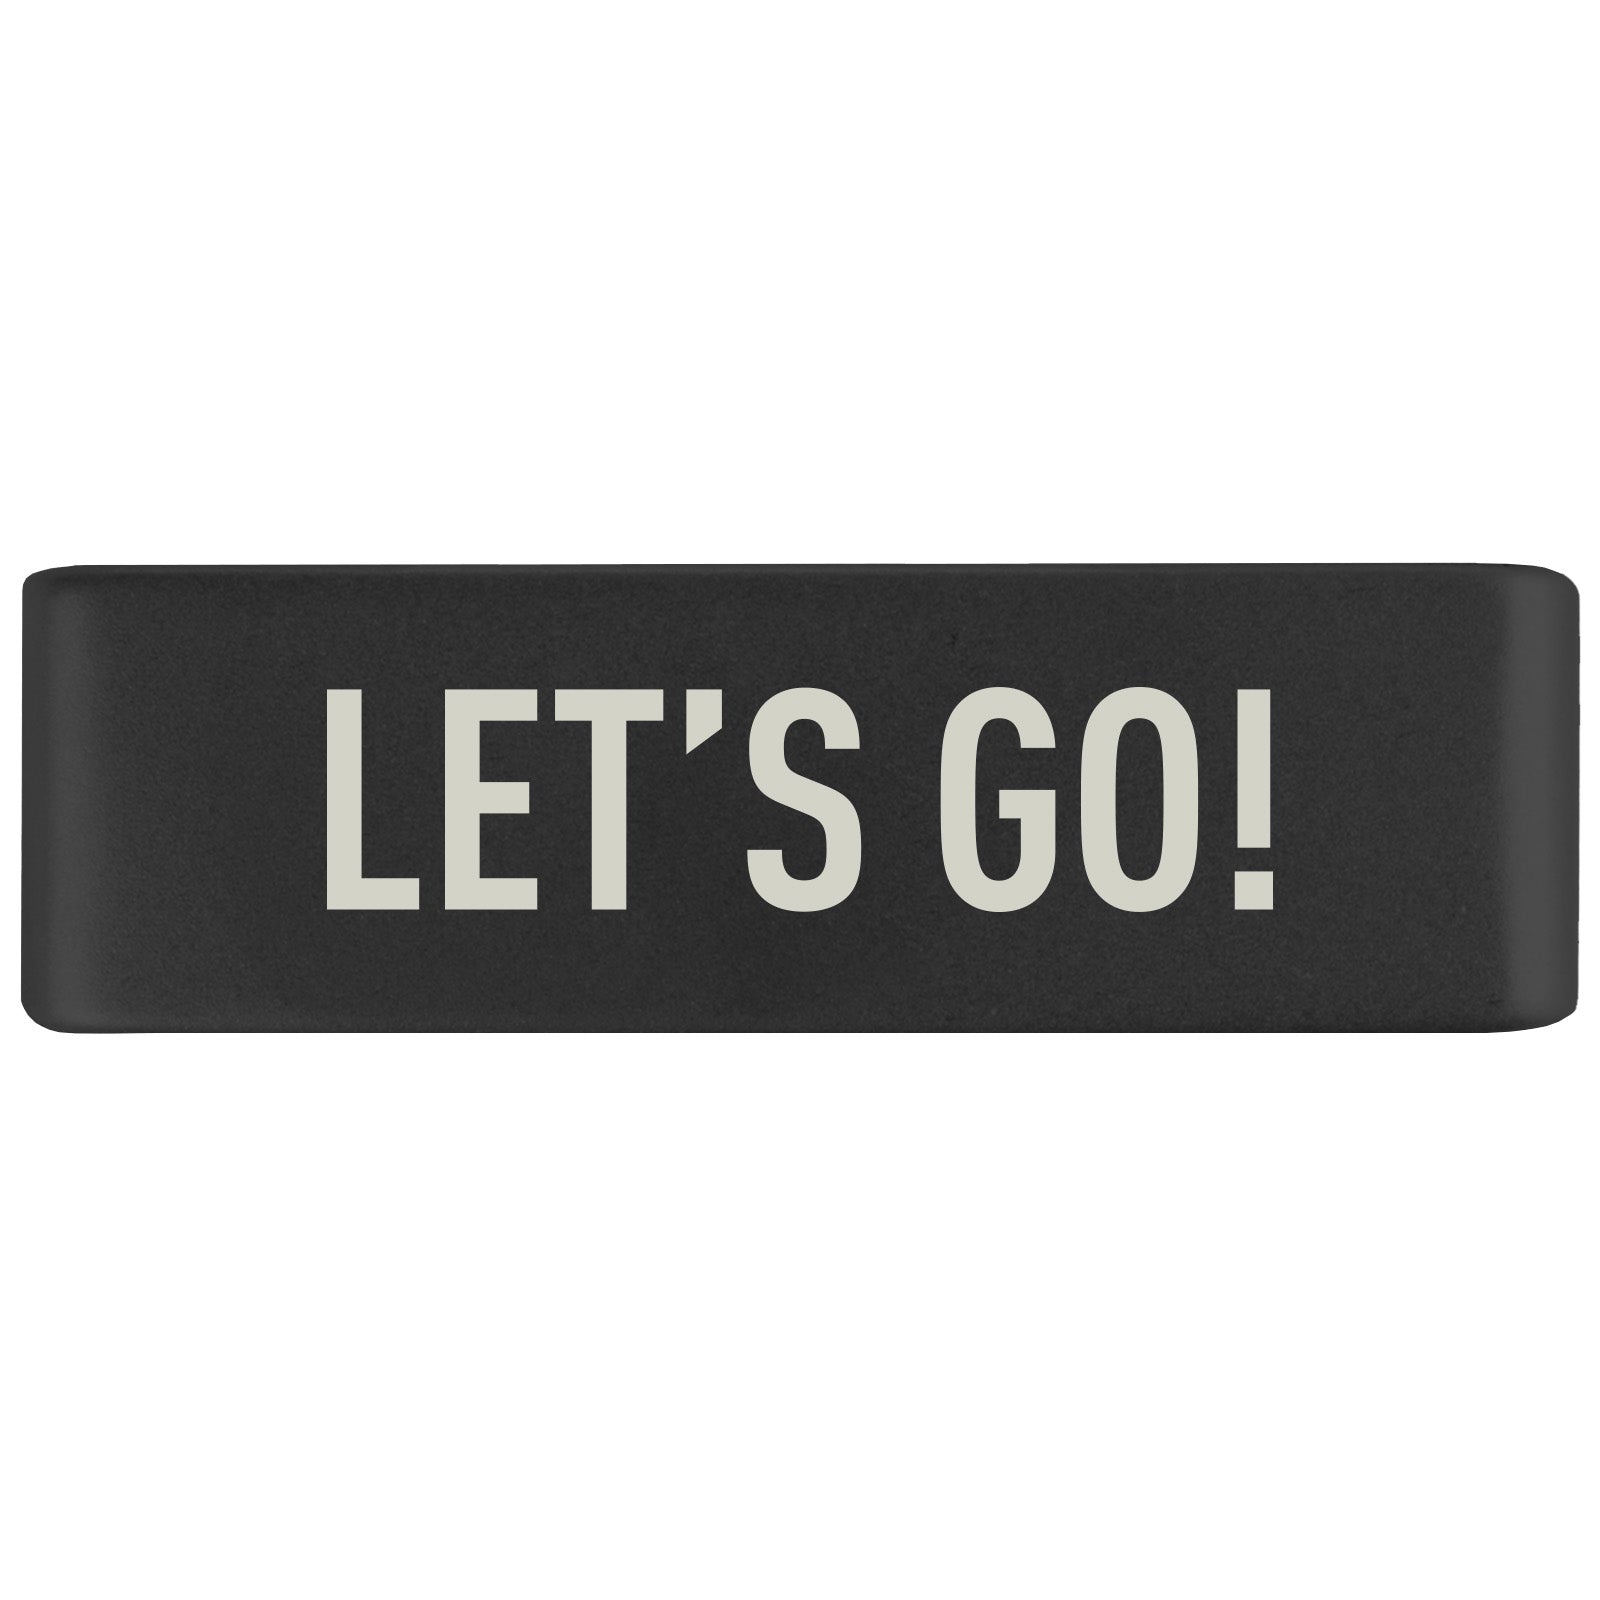 Let's Go Badge Badge 19mm - ROAD iD